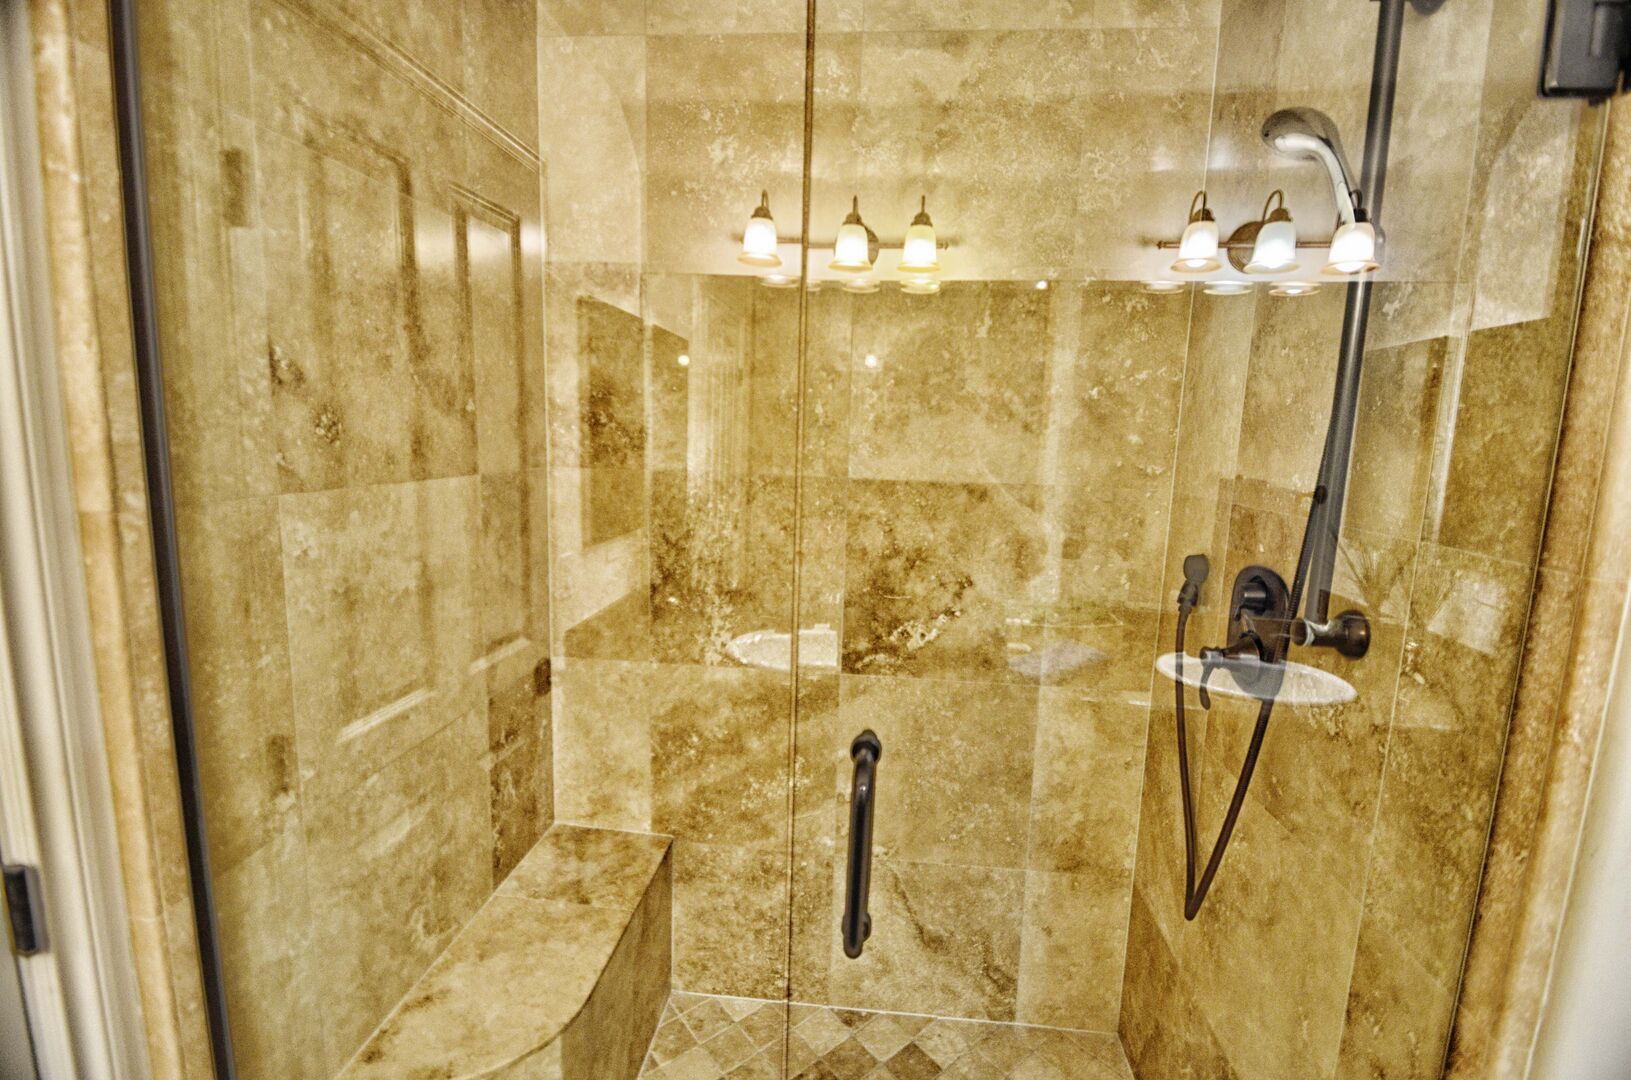 Upstairs master bathroom with walk-in shower and rainfall shower head